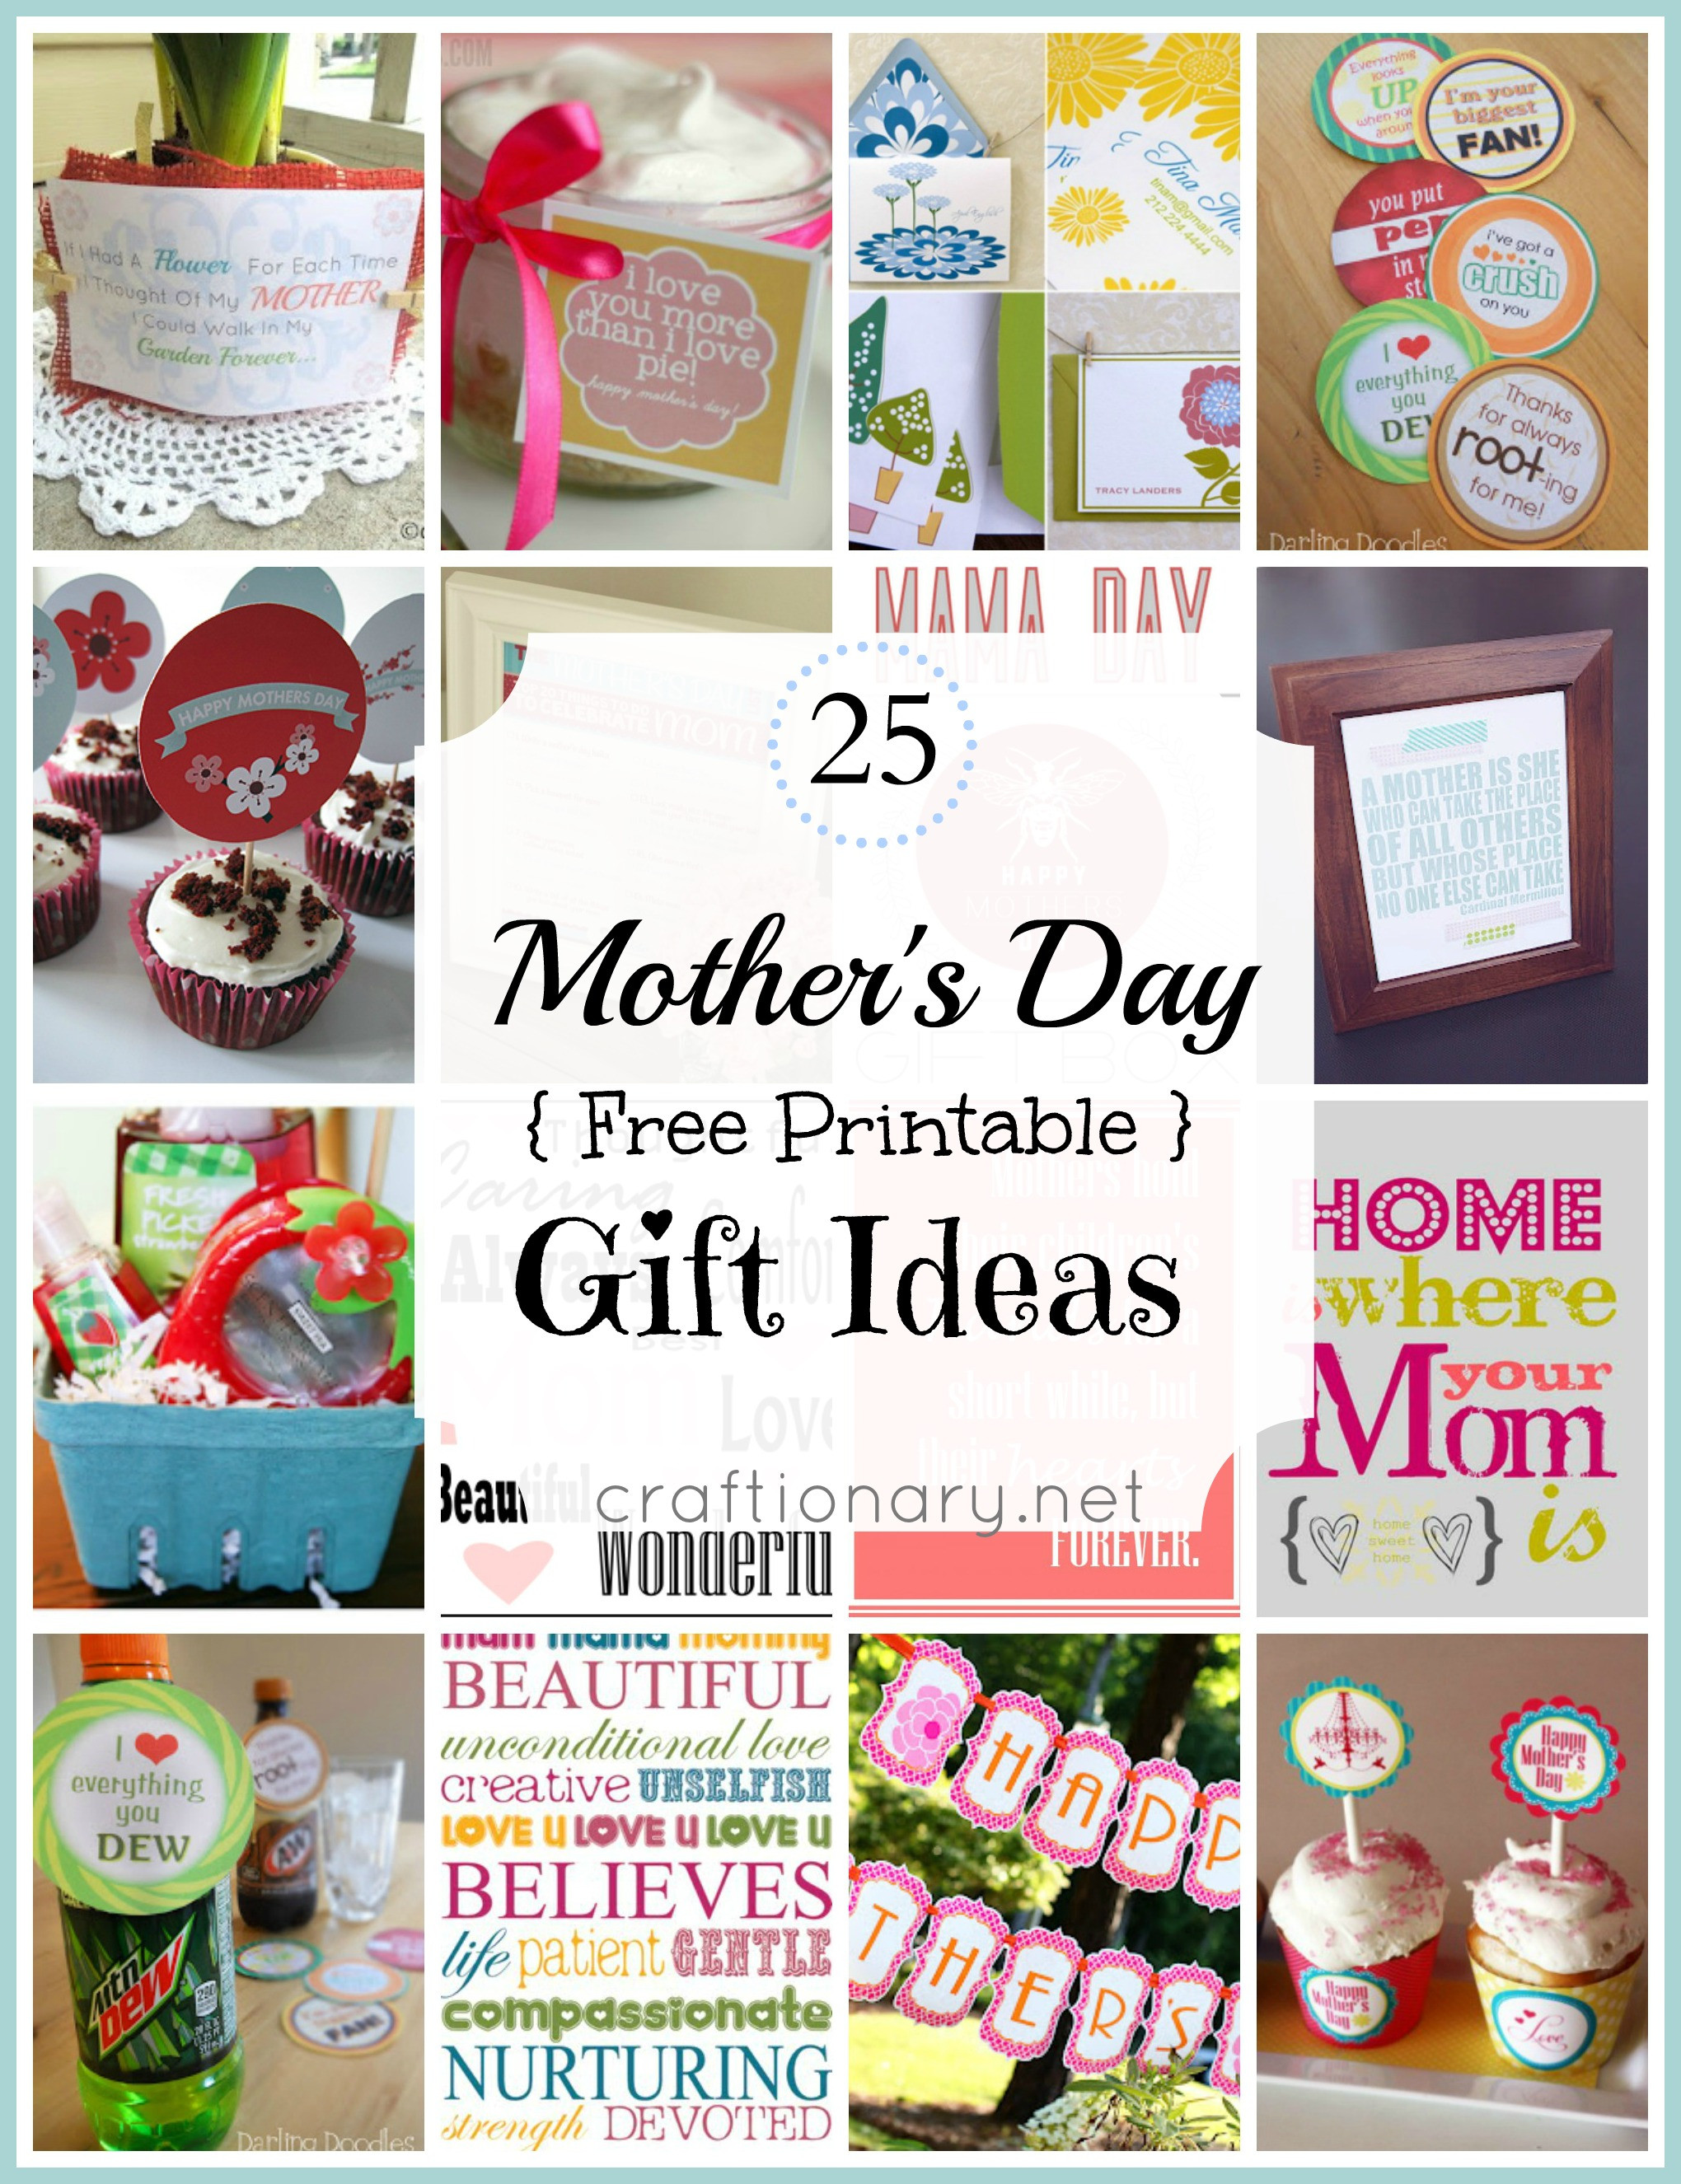 Best Mothers Day Gift Ideas
 Craftionary